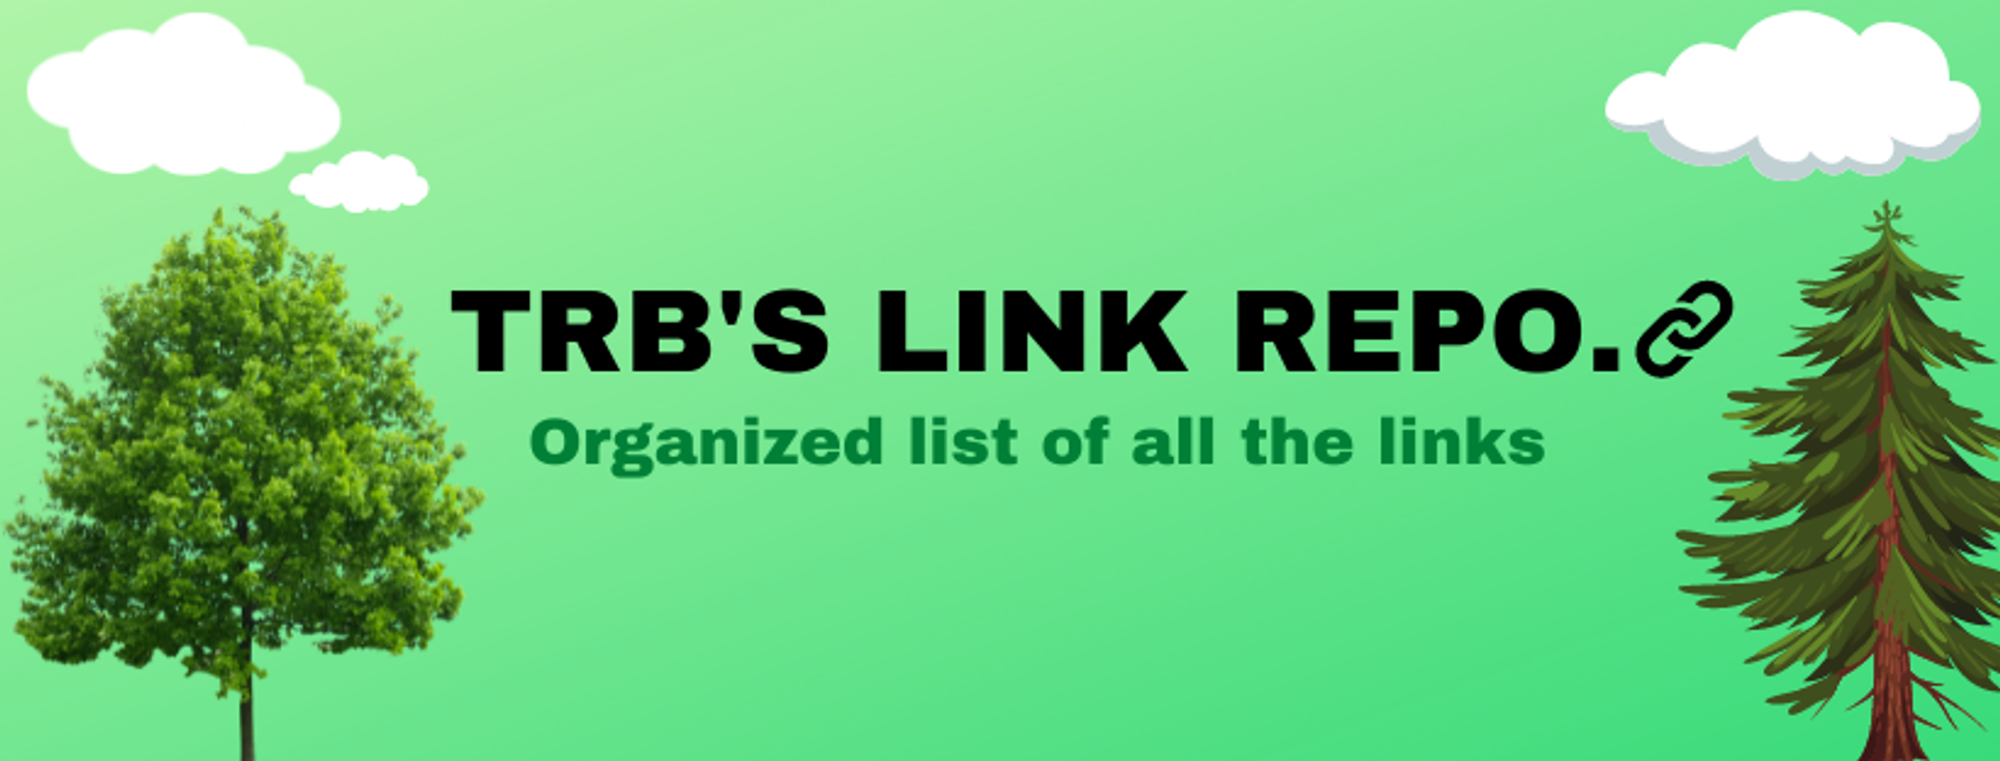 LINKS BY TRB